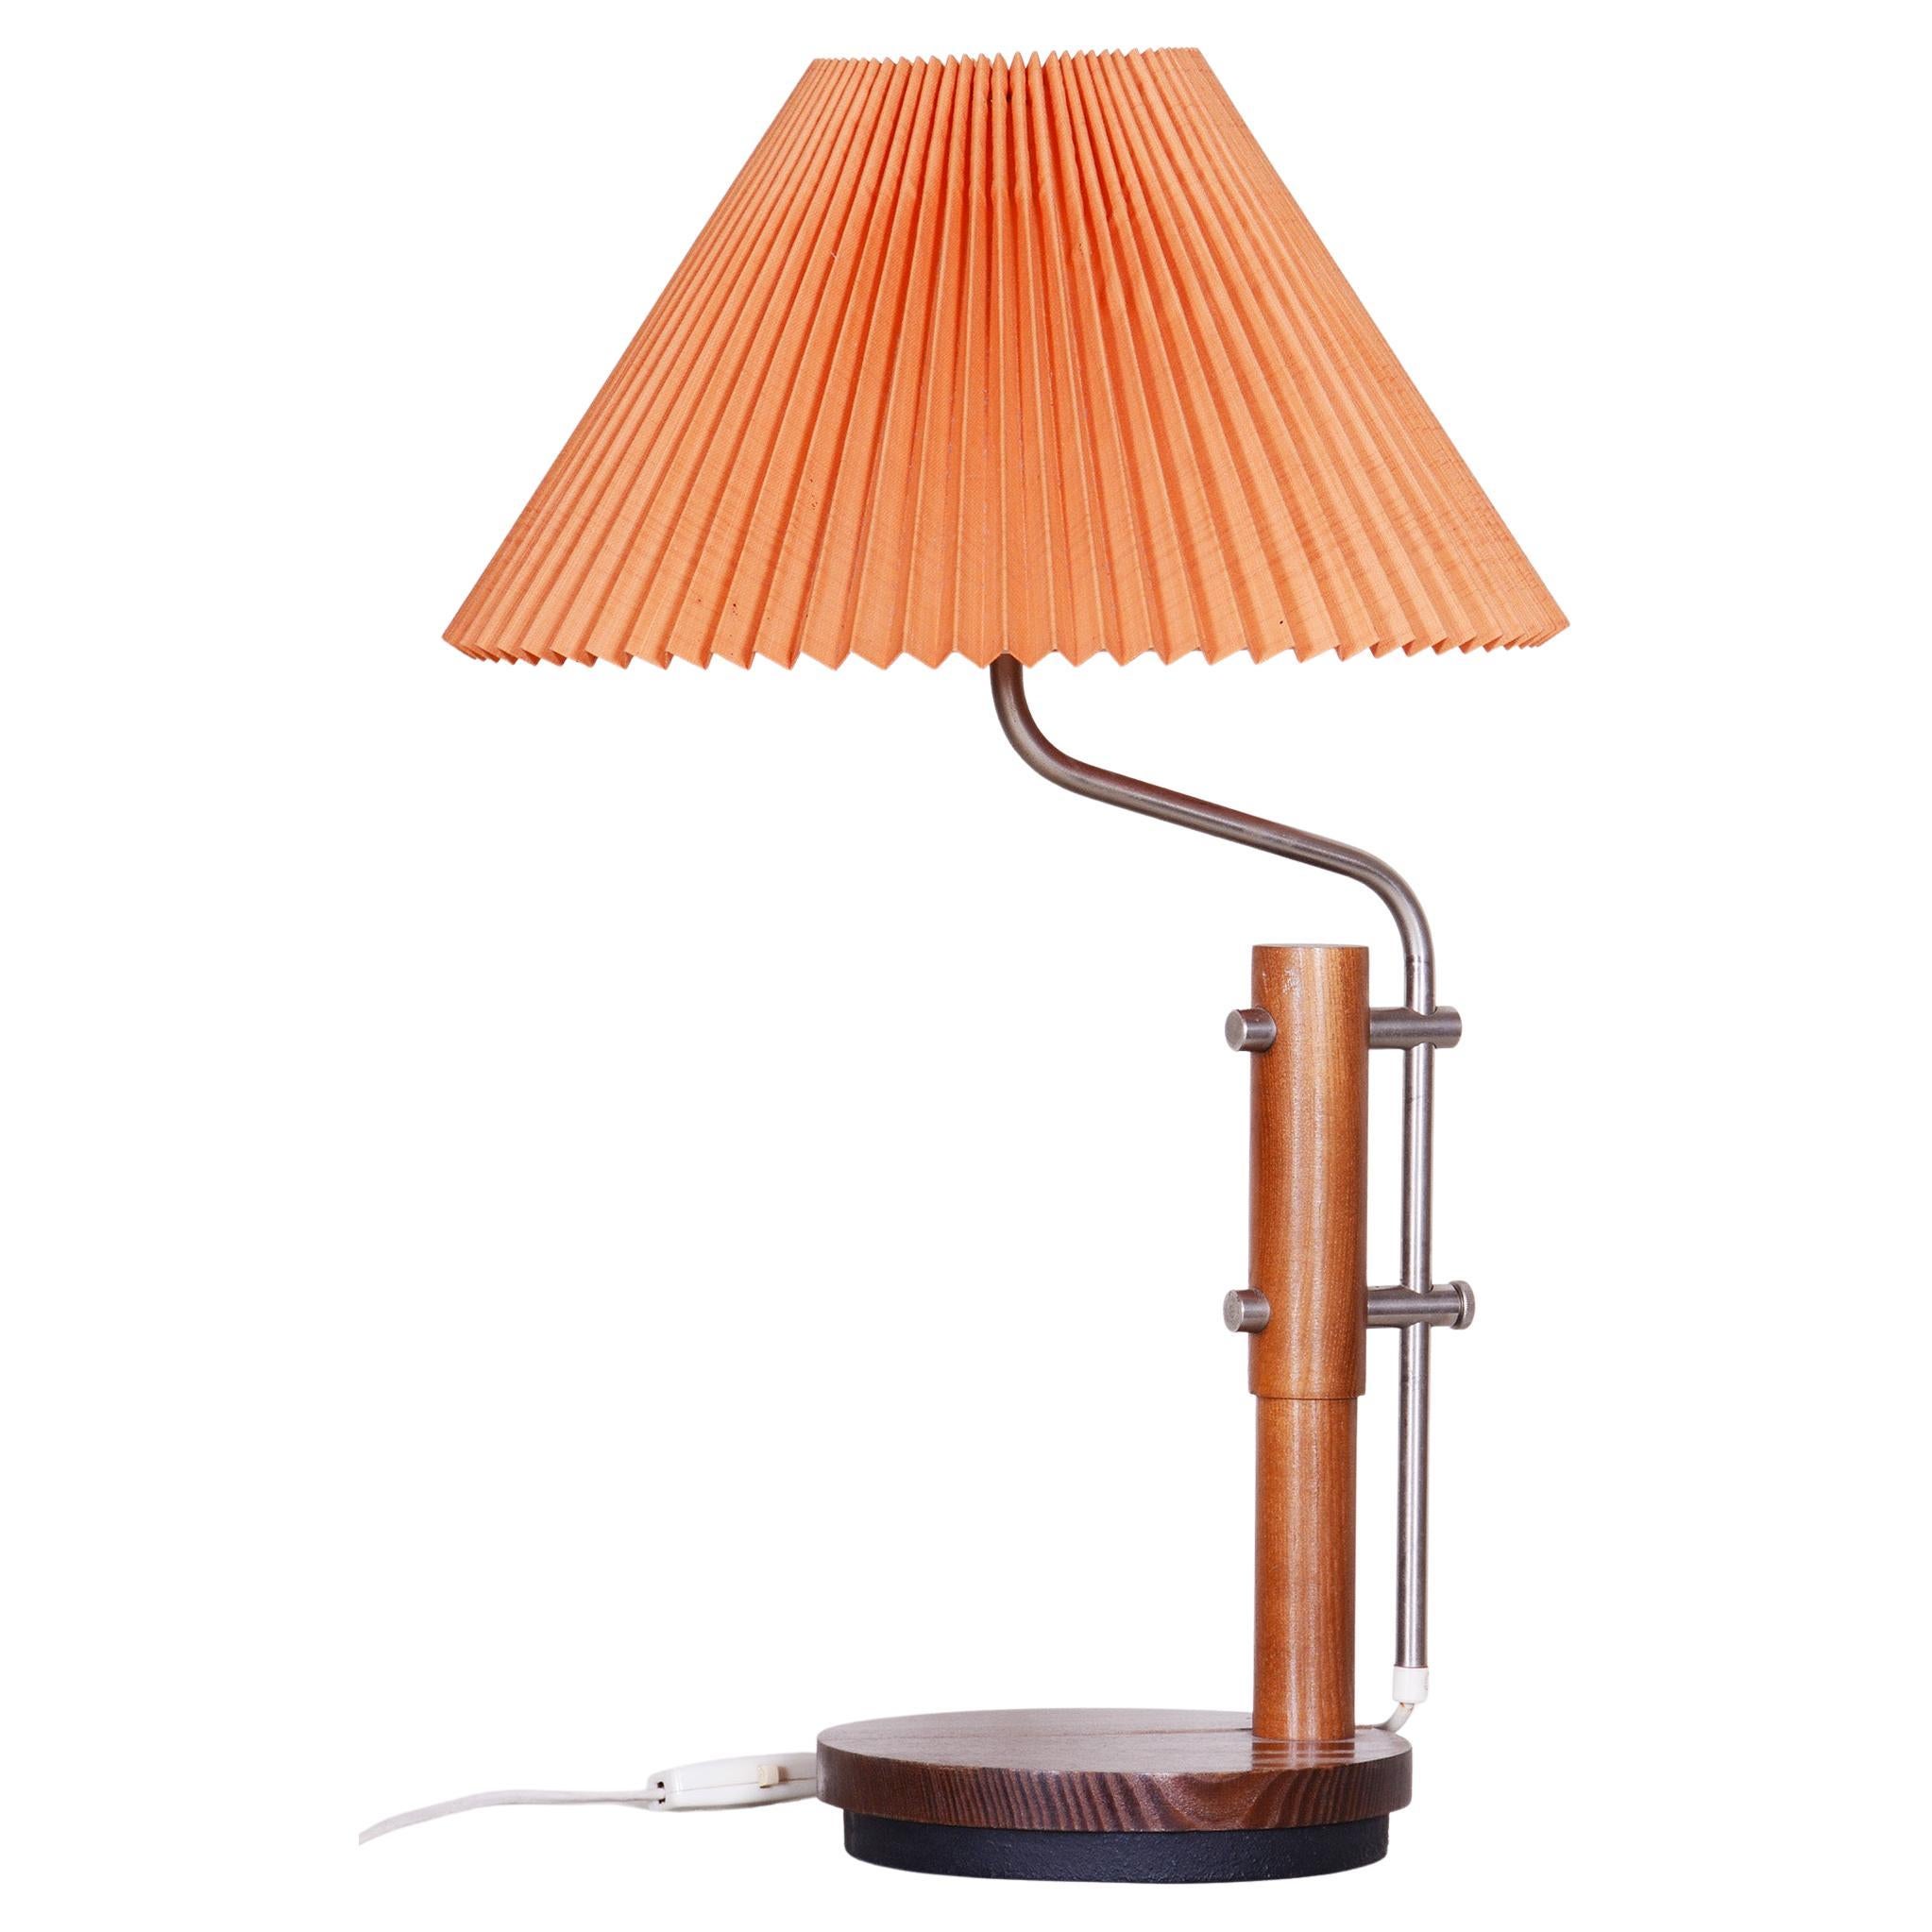 Midcentury Table Lamp, Beech Galvanized Metal, Fully Functional, Czechia, 1960s For Sale